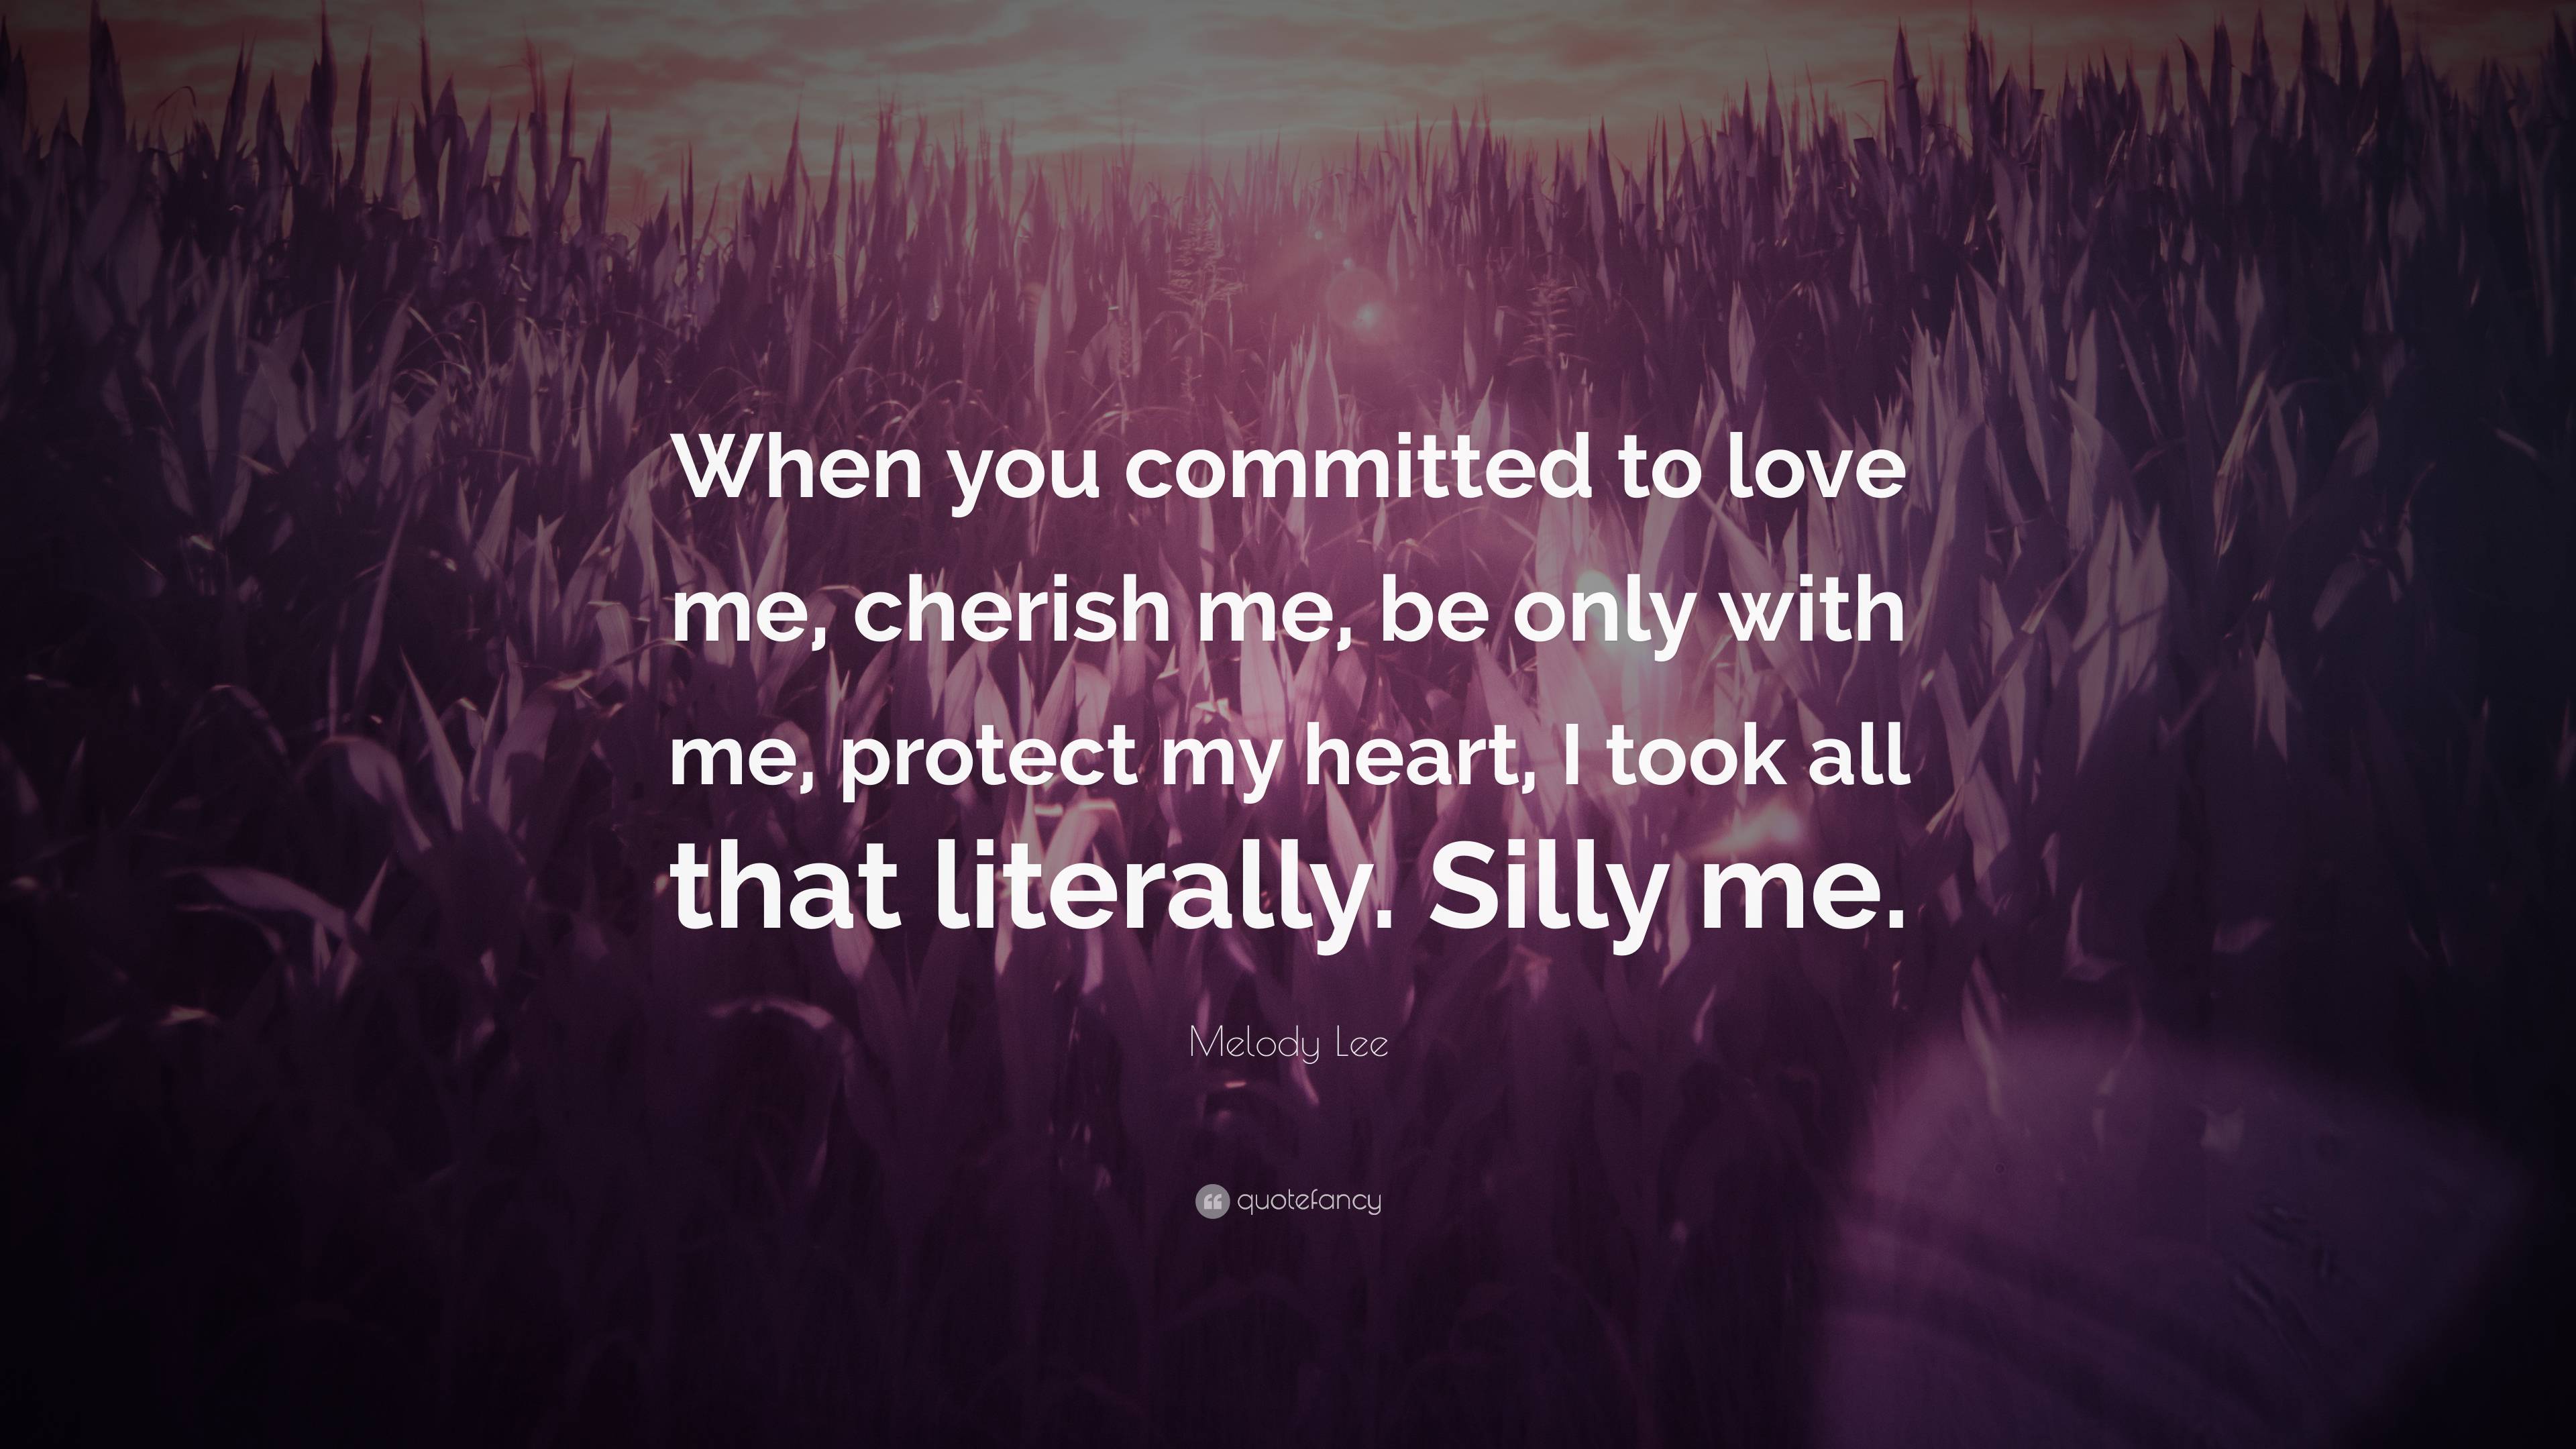 https://quotefancy.com/media/wallpaper/3840x2160/7648392-Melody-Lee-Quote-When-you-committed-to-love-me-cherish-me-be-only.jpg